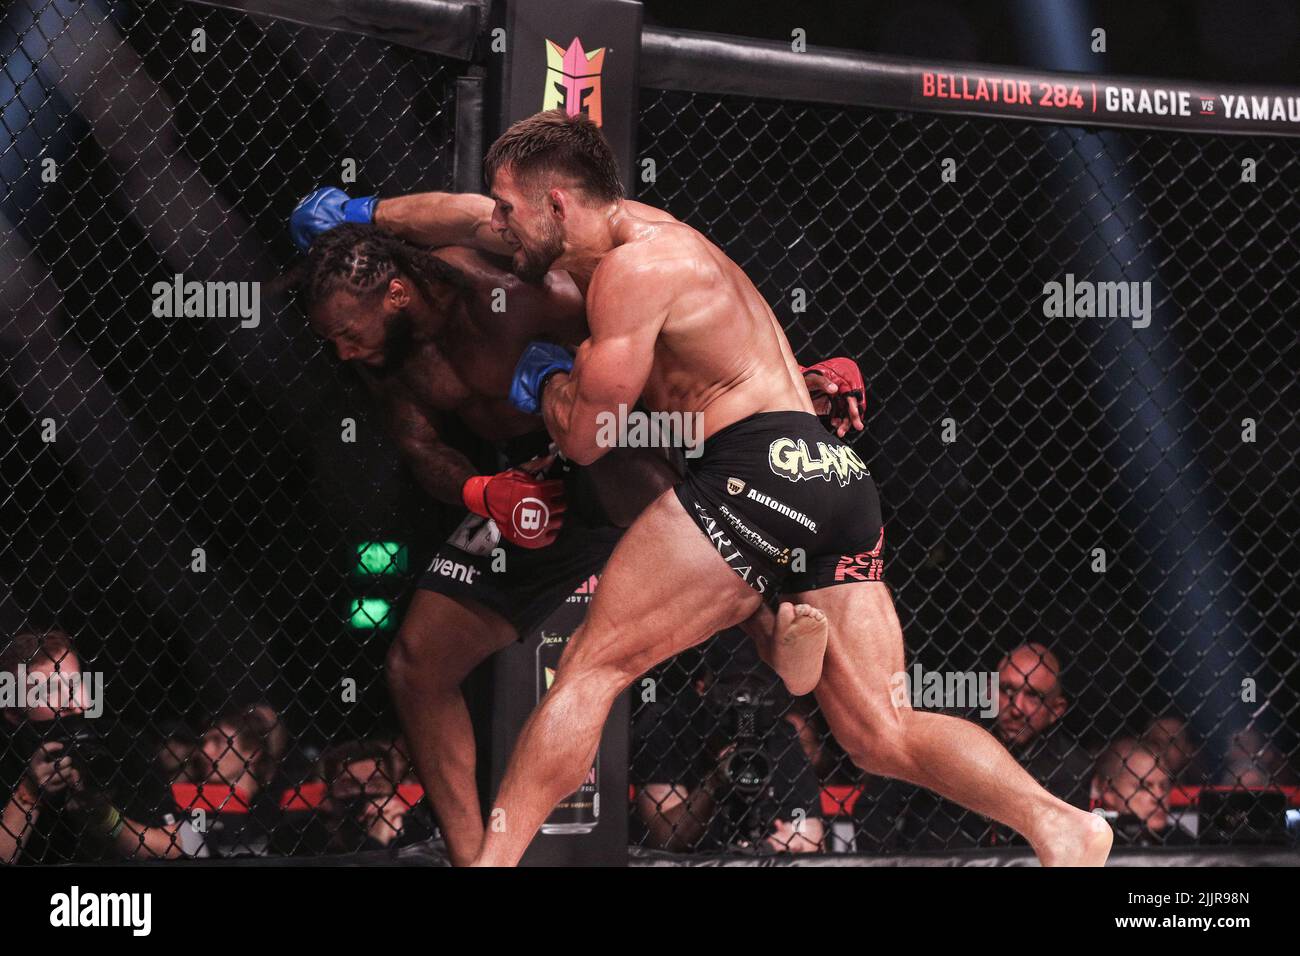 Romero Cotton and Dalton Rosta exchange strikes at Bellator 283. Dalton Rosta wins by way of knock out in the third round from the Emerald Queen Casin Stock Photo